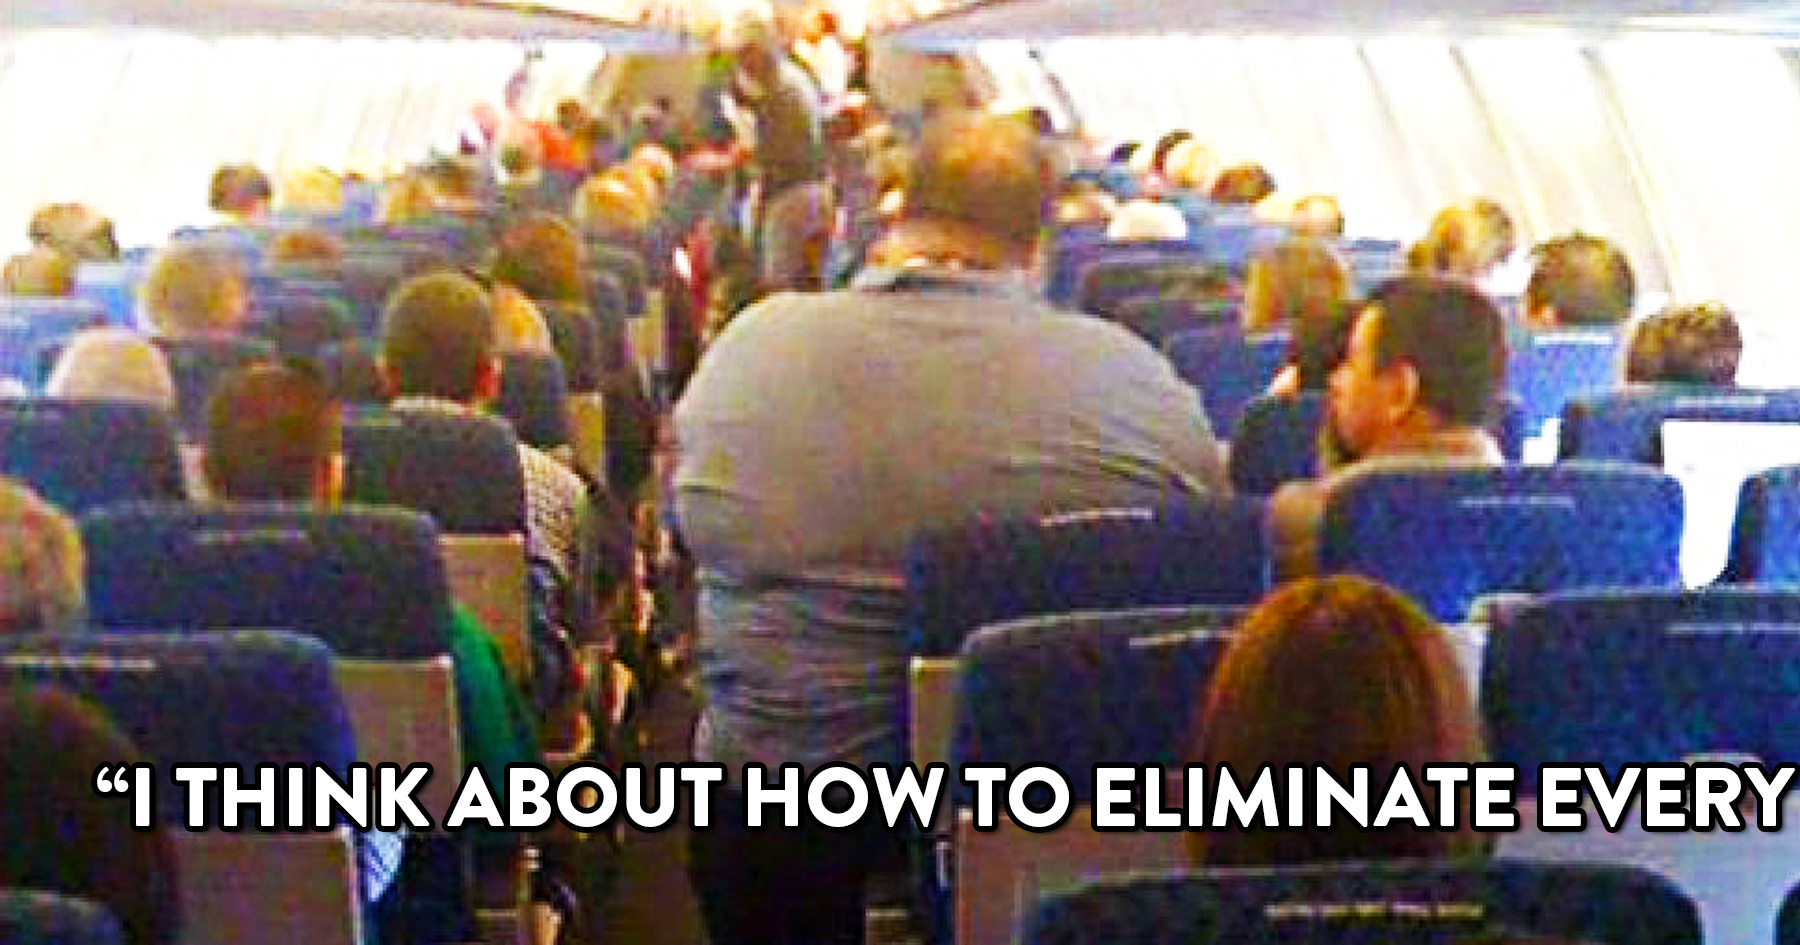 Fat People Airplane 6